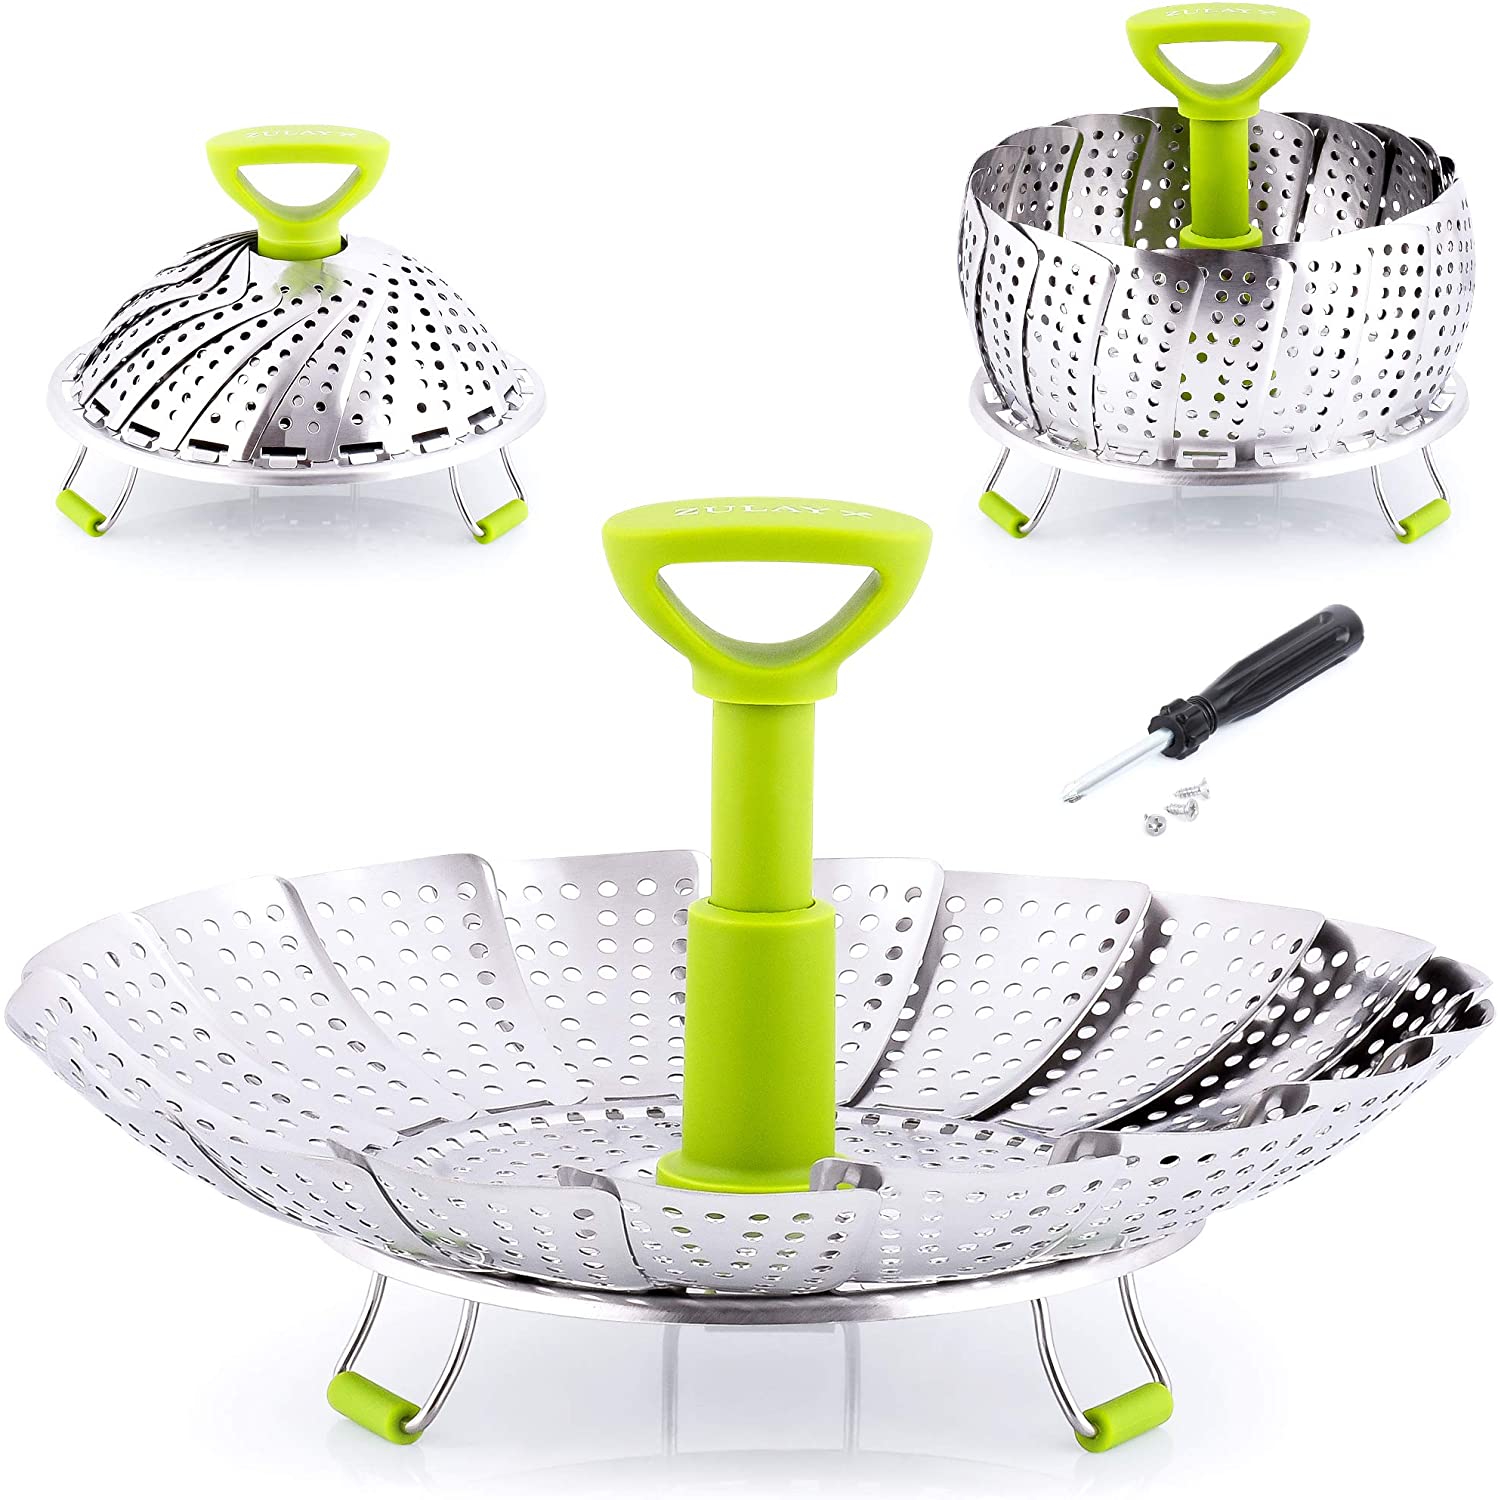 Vegetable Steamer Basket for Cooking Stainless Steel Baby Food